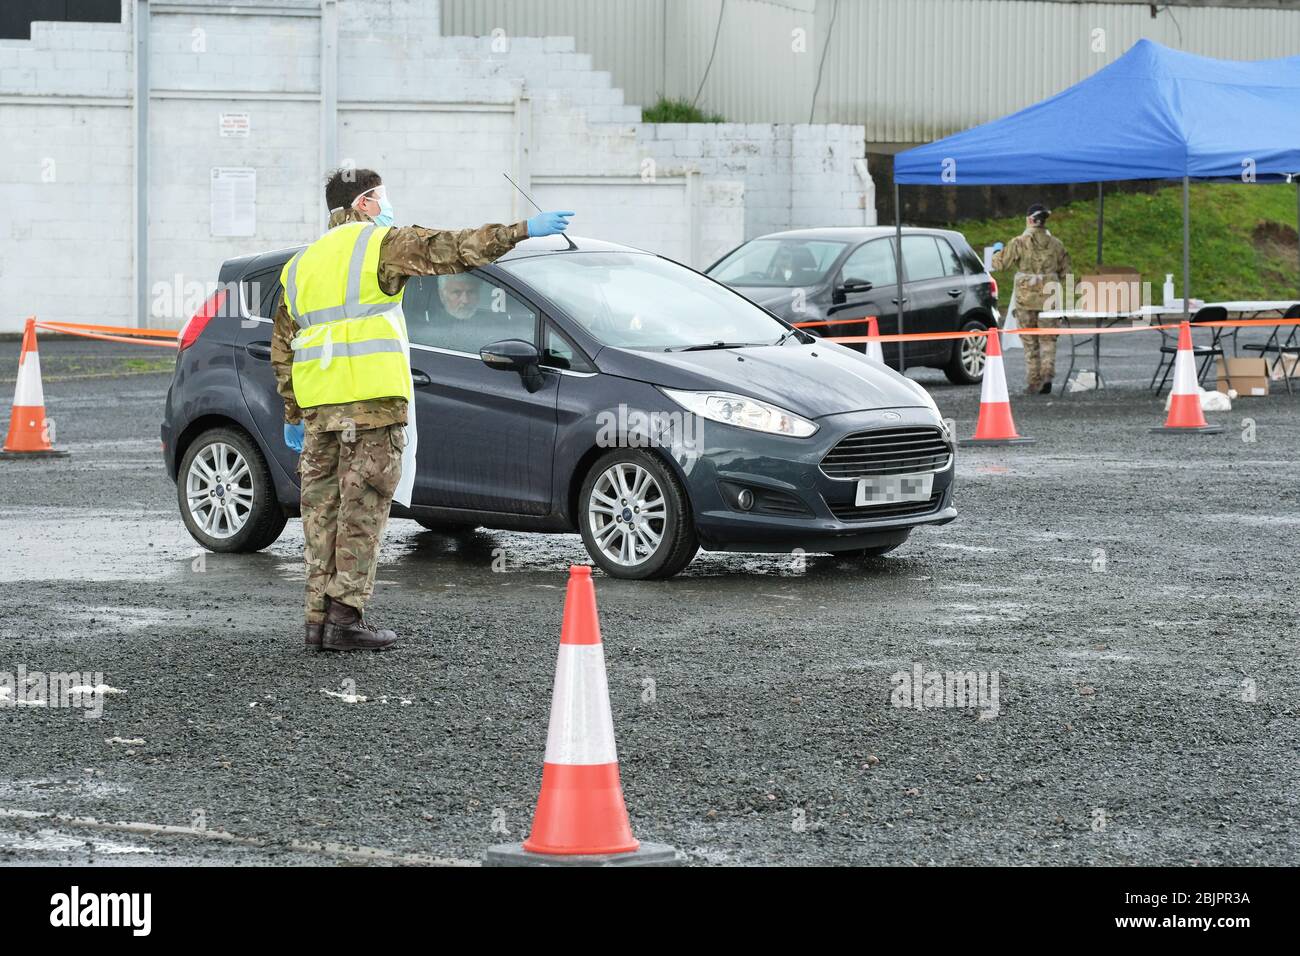 Hereford, Herefordshire UK - Thursday 30th April 2020 - As rain falls Army personnel man a pop-up Coronavirus testing site in a car park in Hereford to provide Covid-19 swab tests as the Government strives to reach 100,000 tests per day by the end of April ( today ). Photo Steven May / Alamy Live News Stock Photo